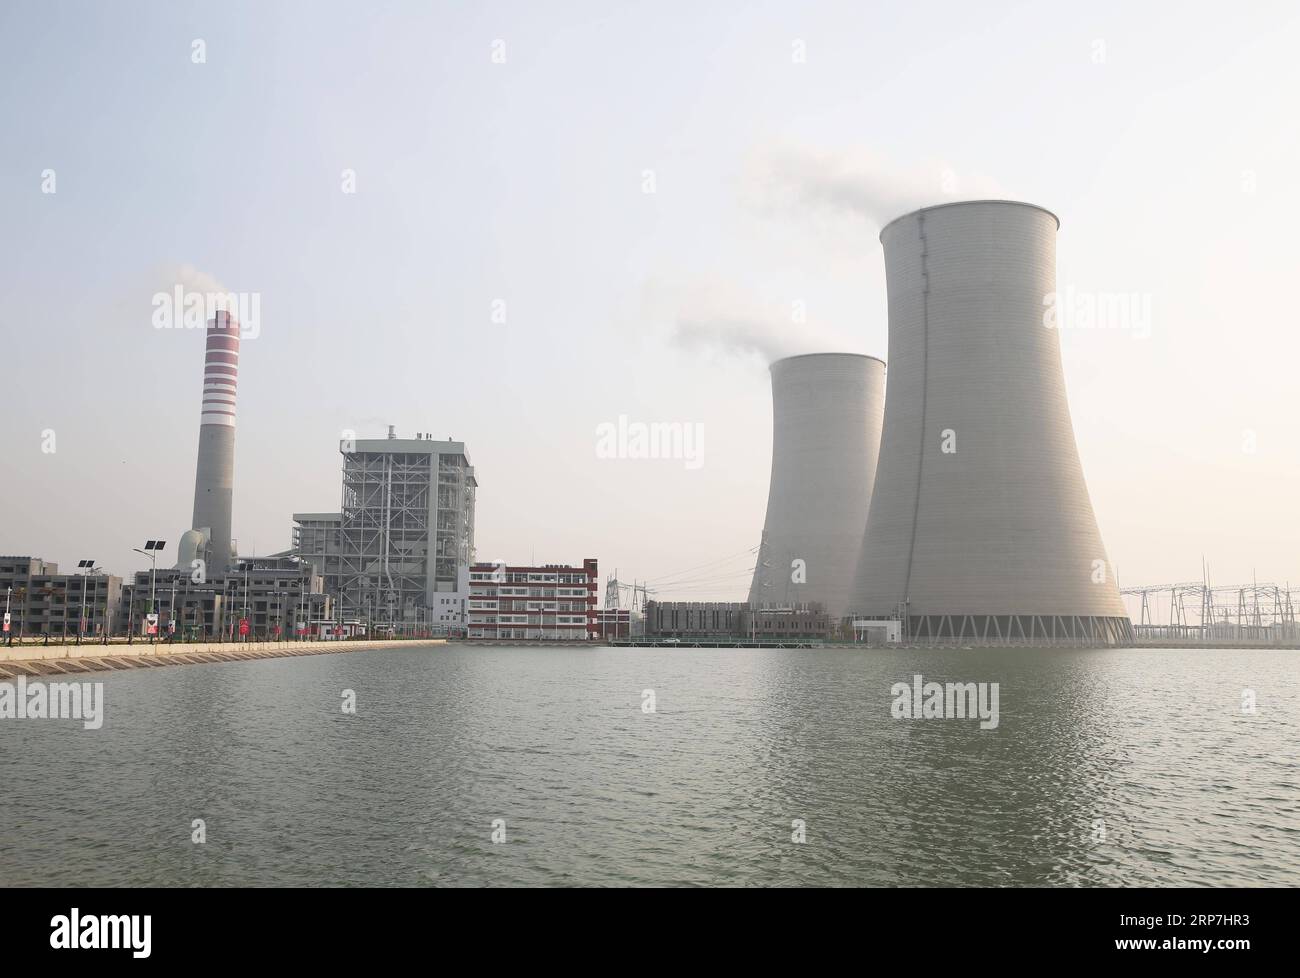 (190207) -- BEIJING, Feb. 7, 2019 -- Photo taken on July 3, 2017 shows the Sahiwal coal-fired power plant in Sahiwal in Pakistan s eastern province of Punjab. Pakistani Prime Minister Imran Khan said on Wednesday that the China-Pakistan Economic Corridor (CPEC) will bring a host of economic opportunities for the country s southwest Balochistan province, local reports said. During his conversation with political representatives of the Balochistan Awami Party, the prime minister said that development of Gwadar port will open a new era of prosperity in Balochistan by creating vast opportunities f Stock Photo